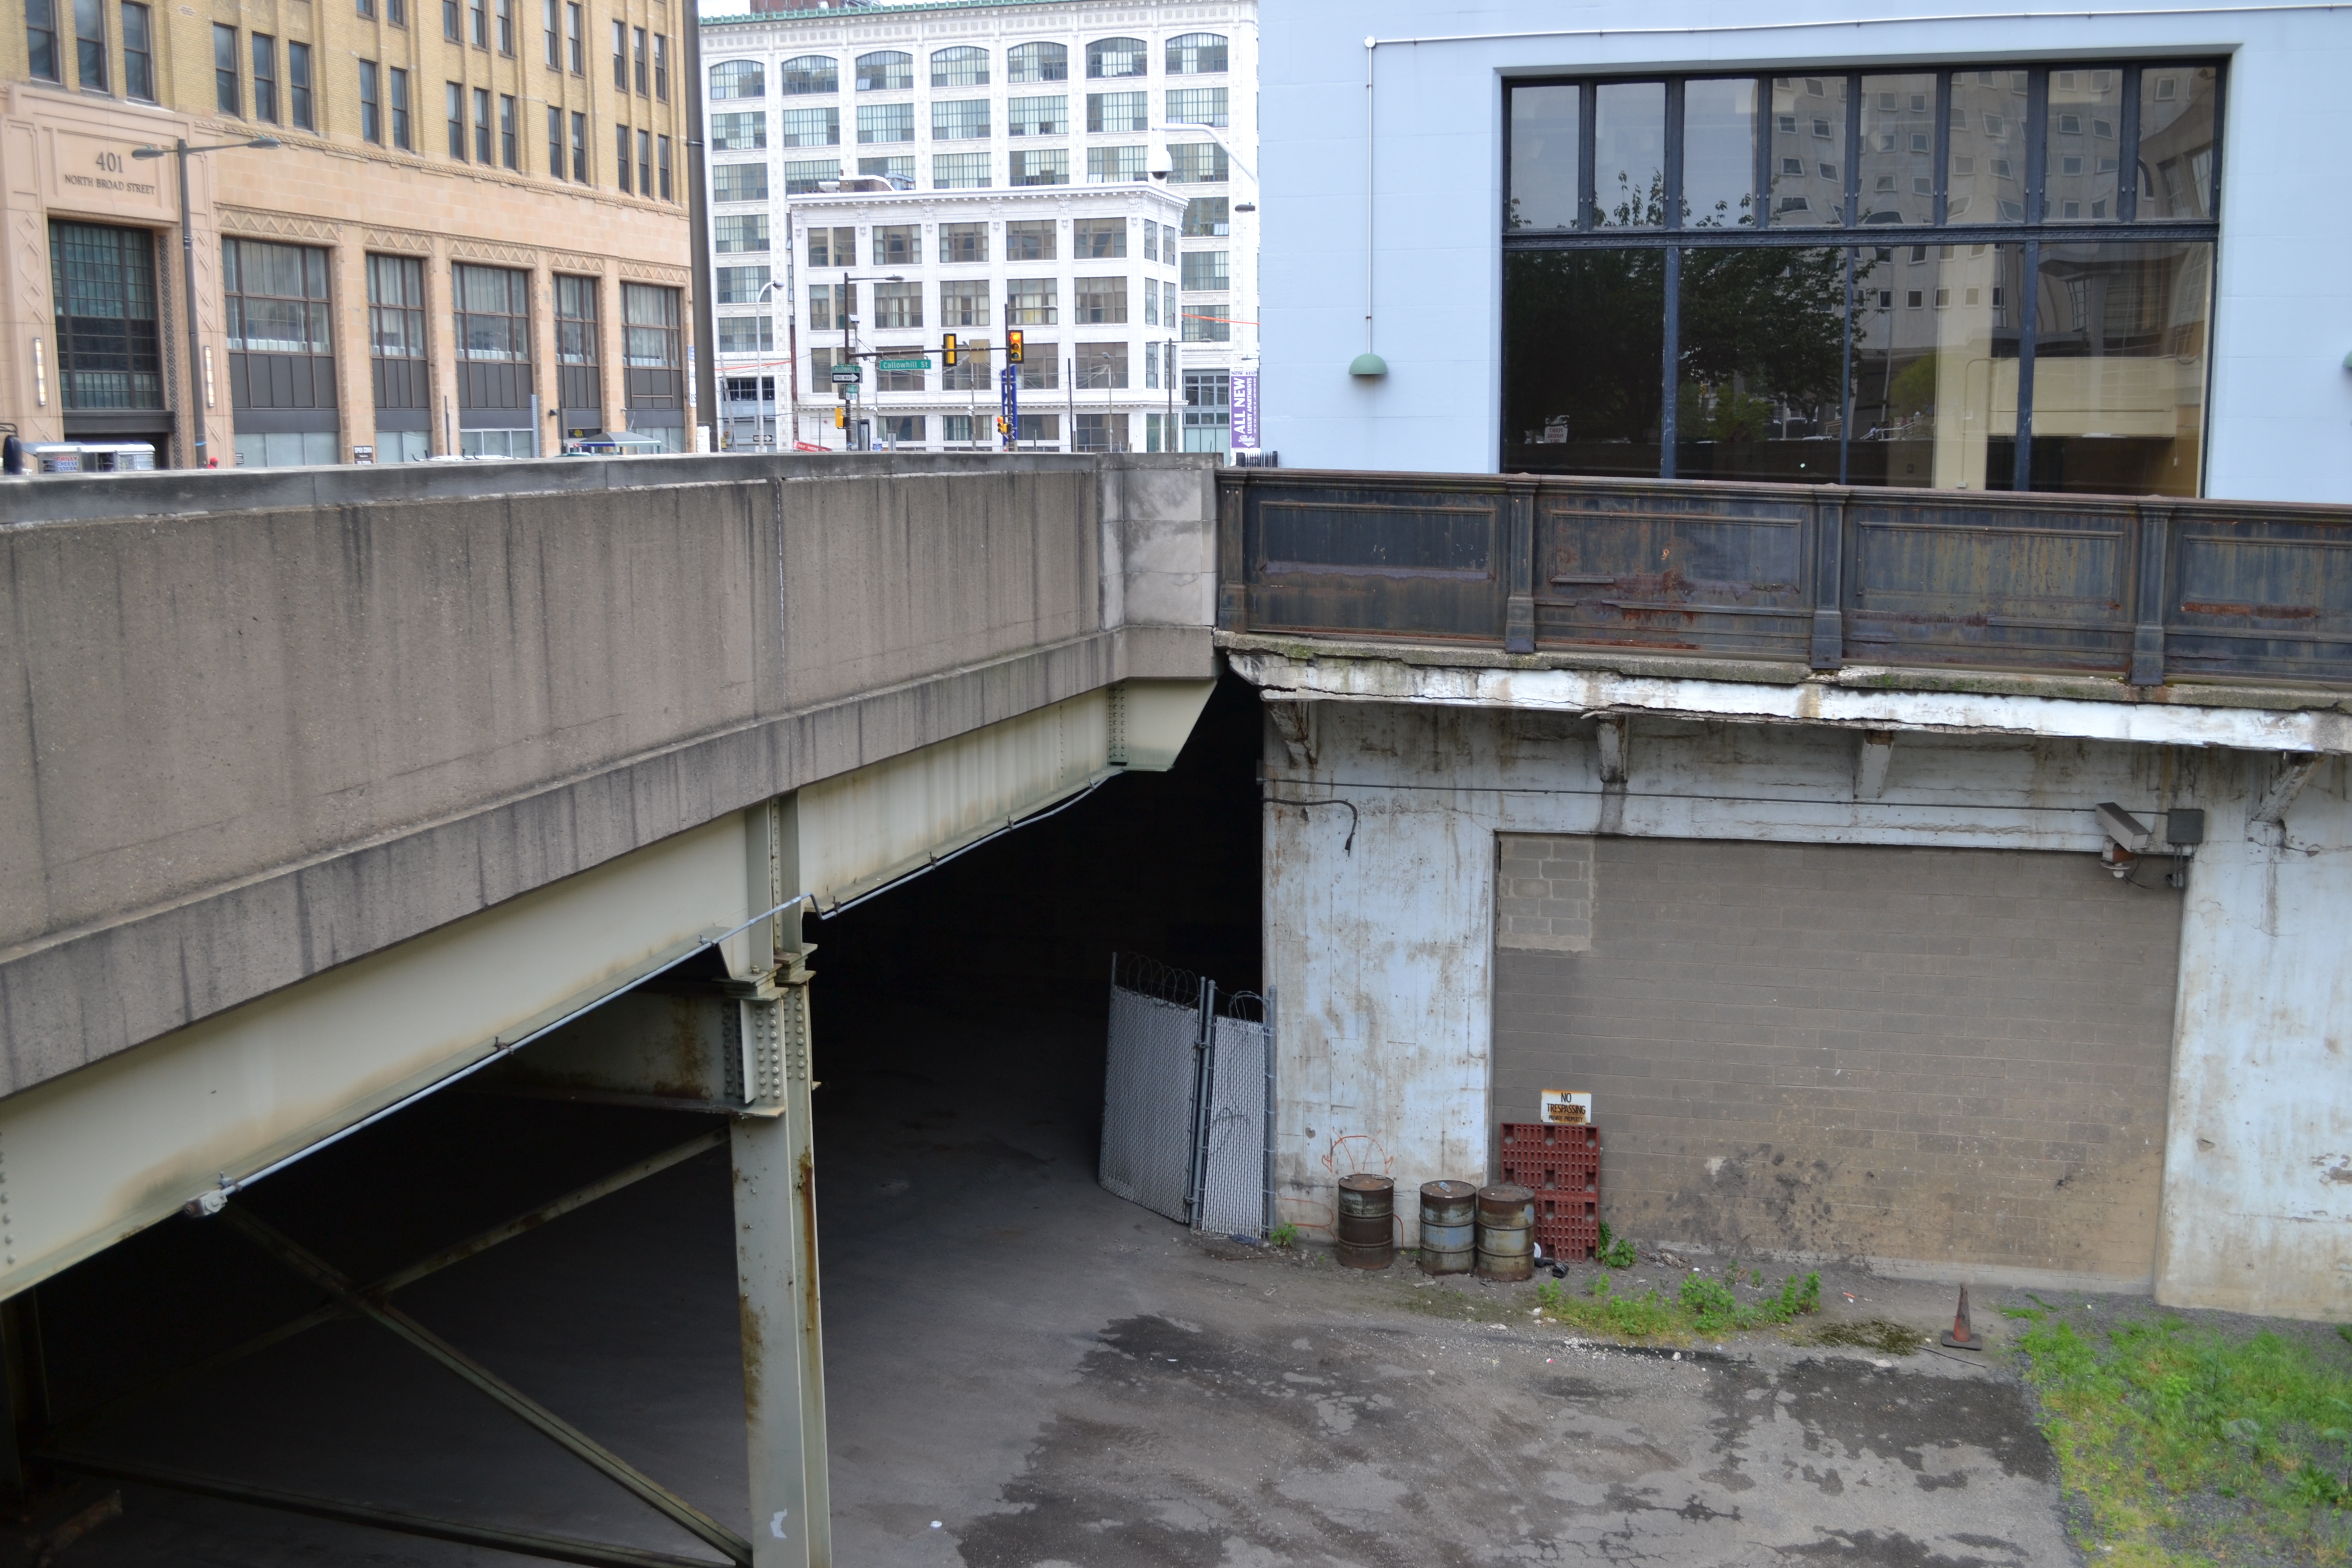 The bridge is visible through a small opening next to the former Inquirer building